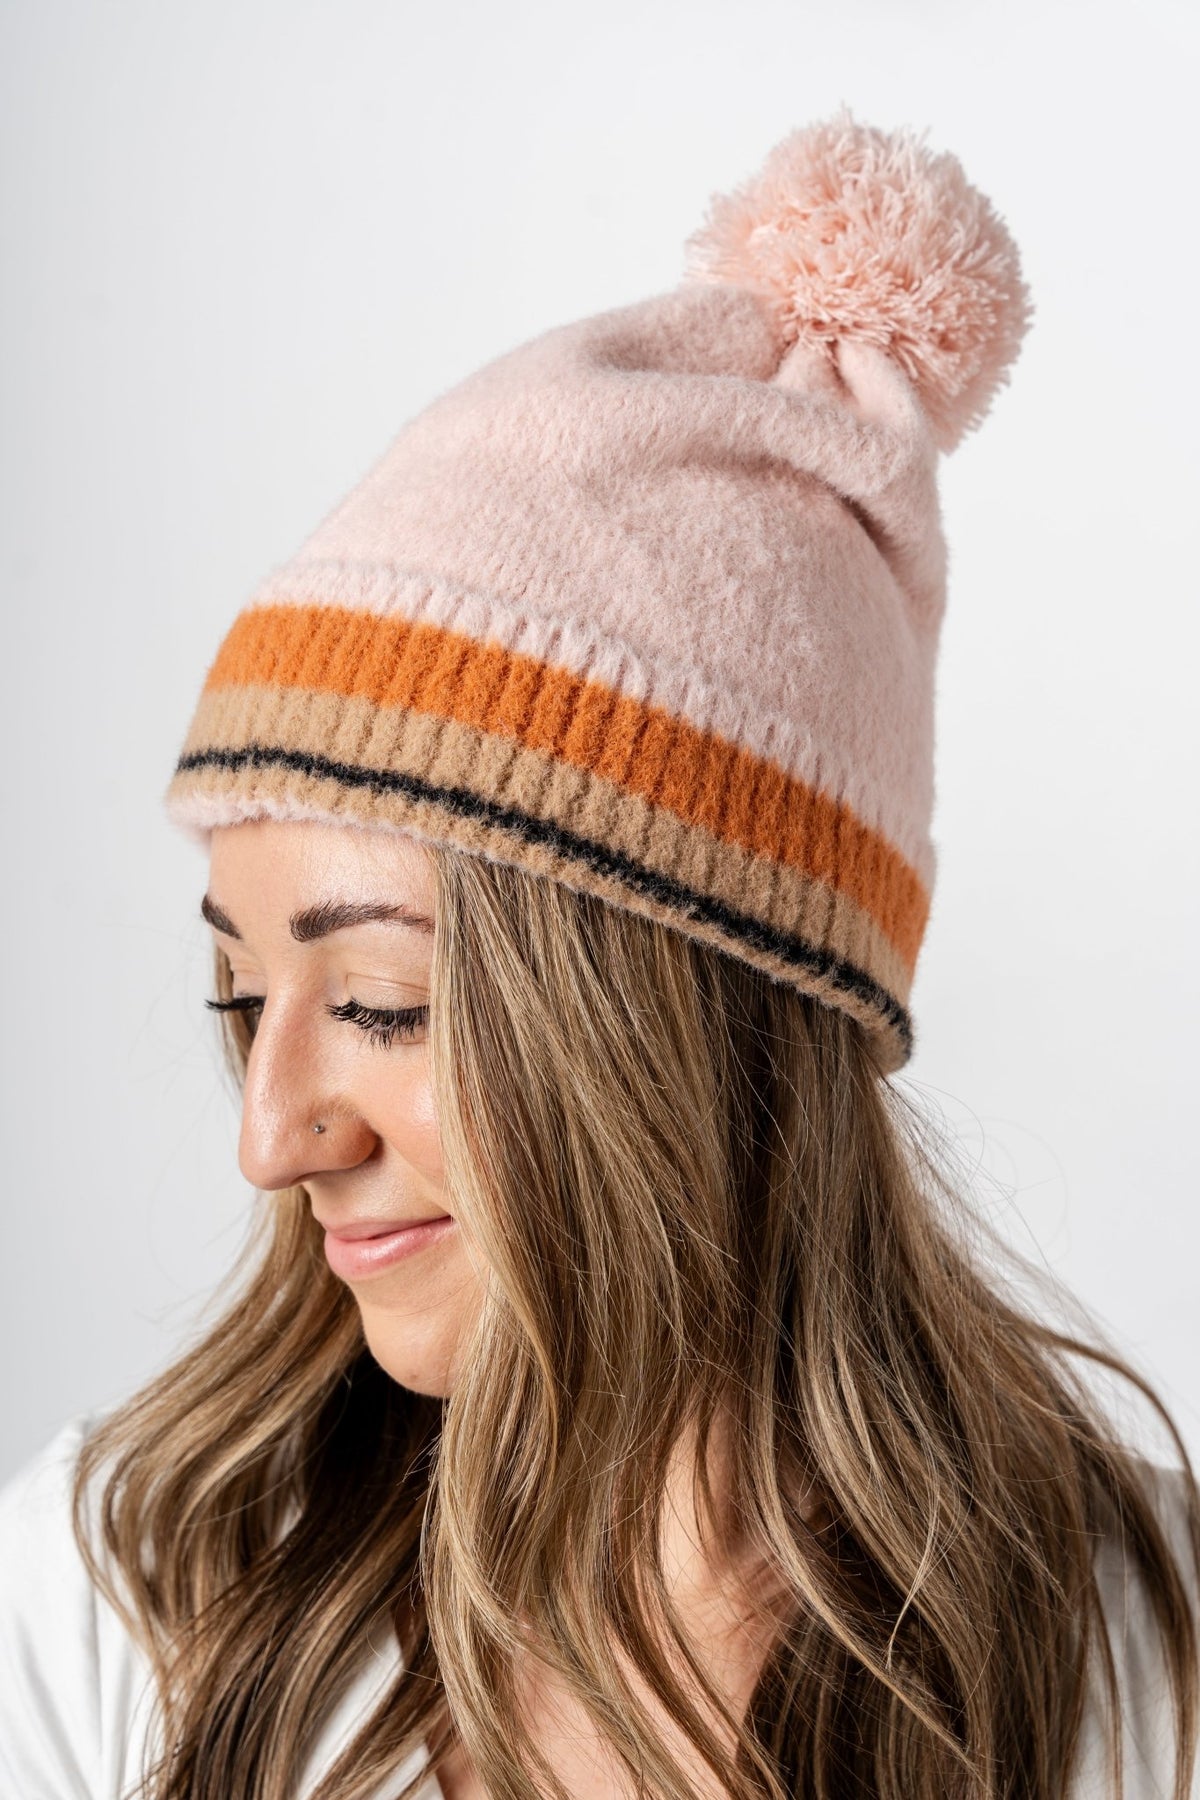 Emerson stripe beanie pink - Trendy Gifts at Lush Fashion Lounge Boutique in Oklahoma City